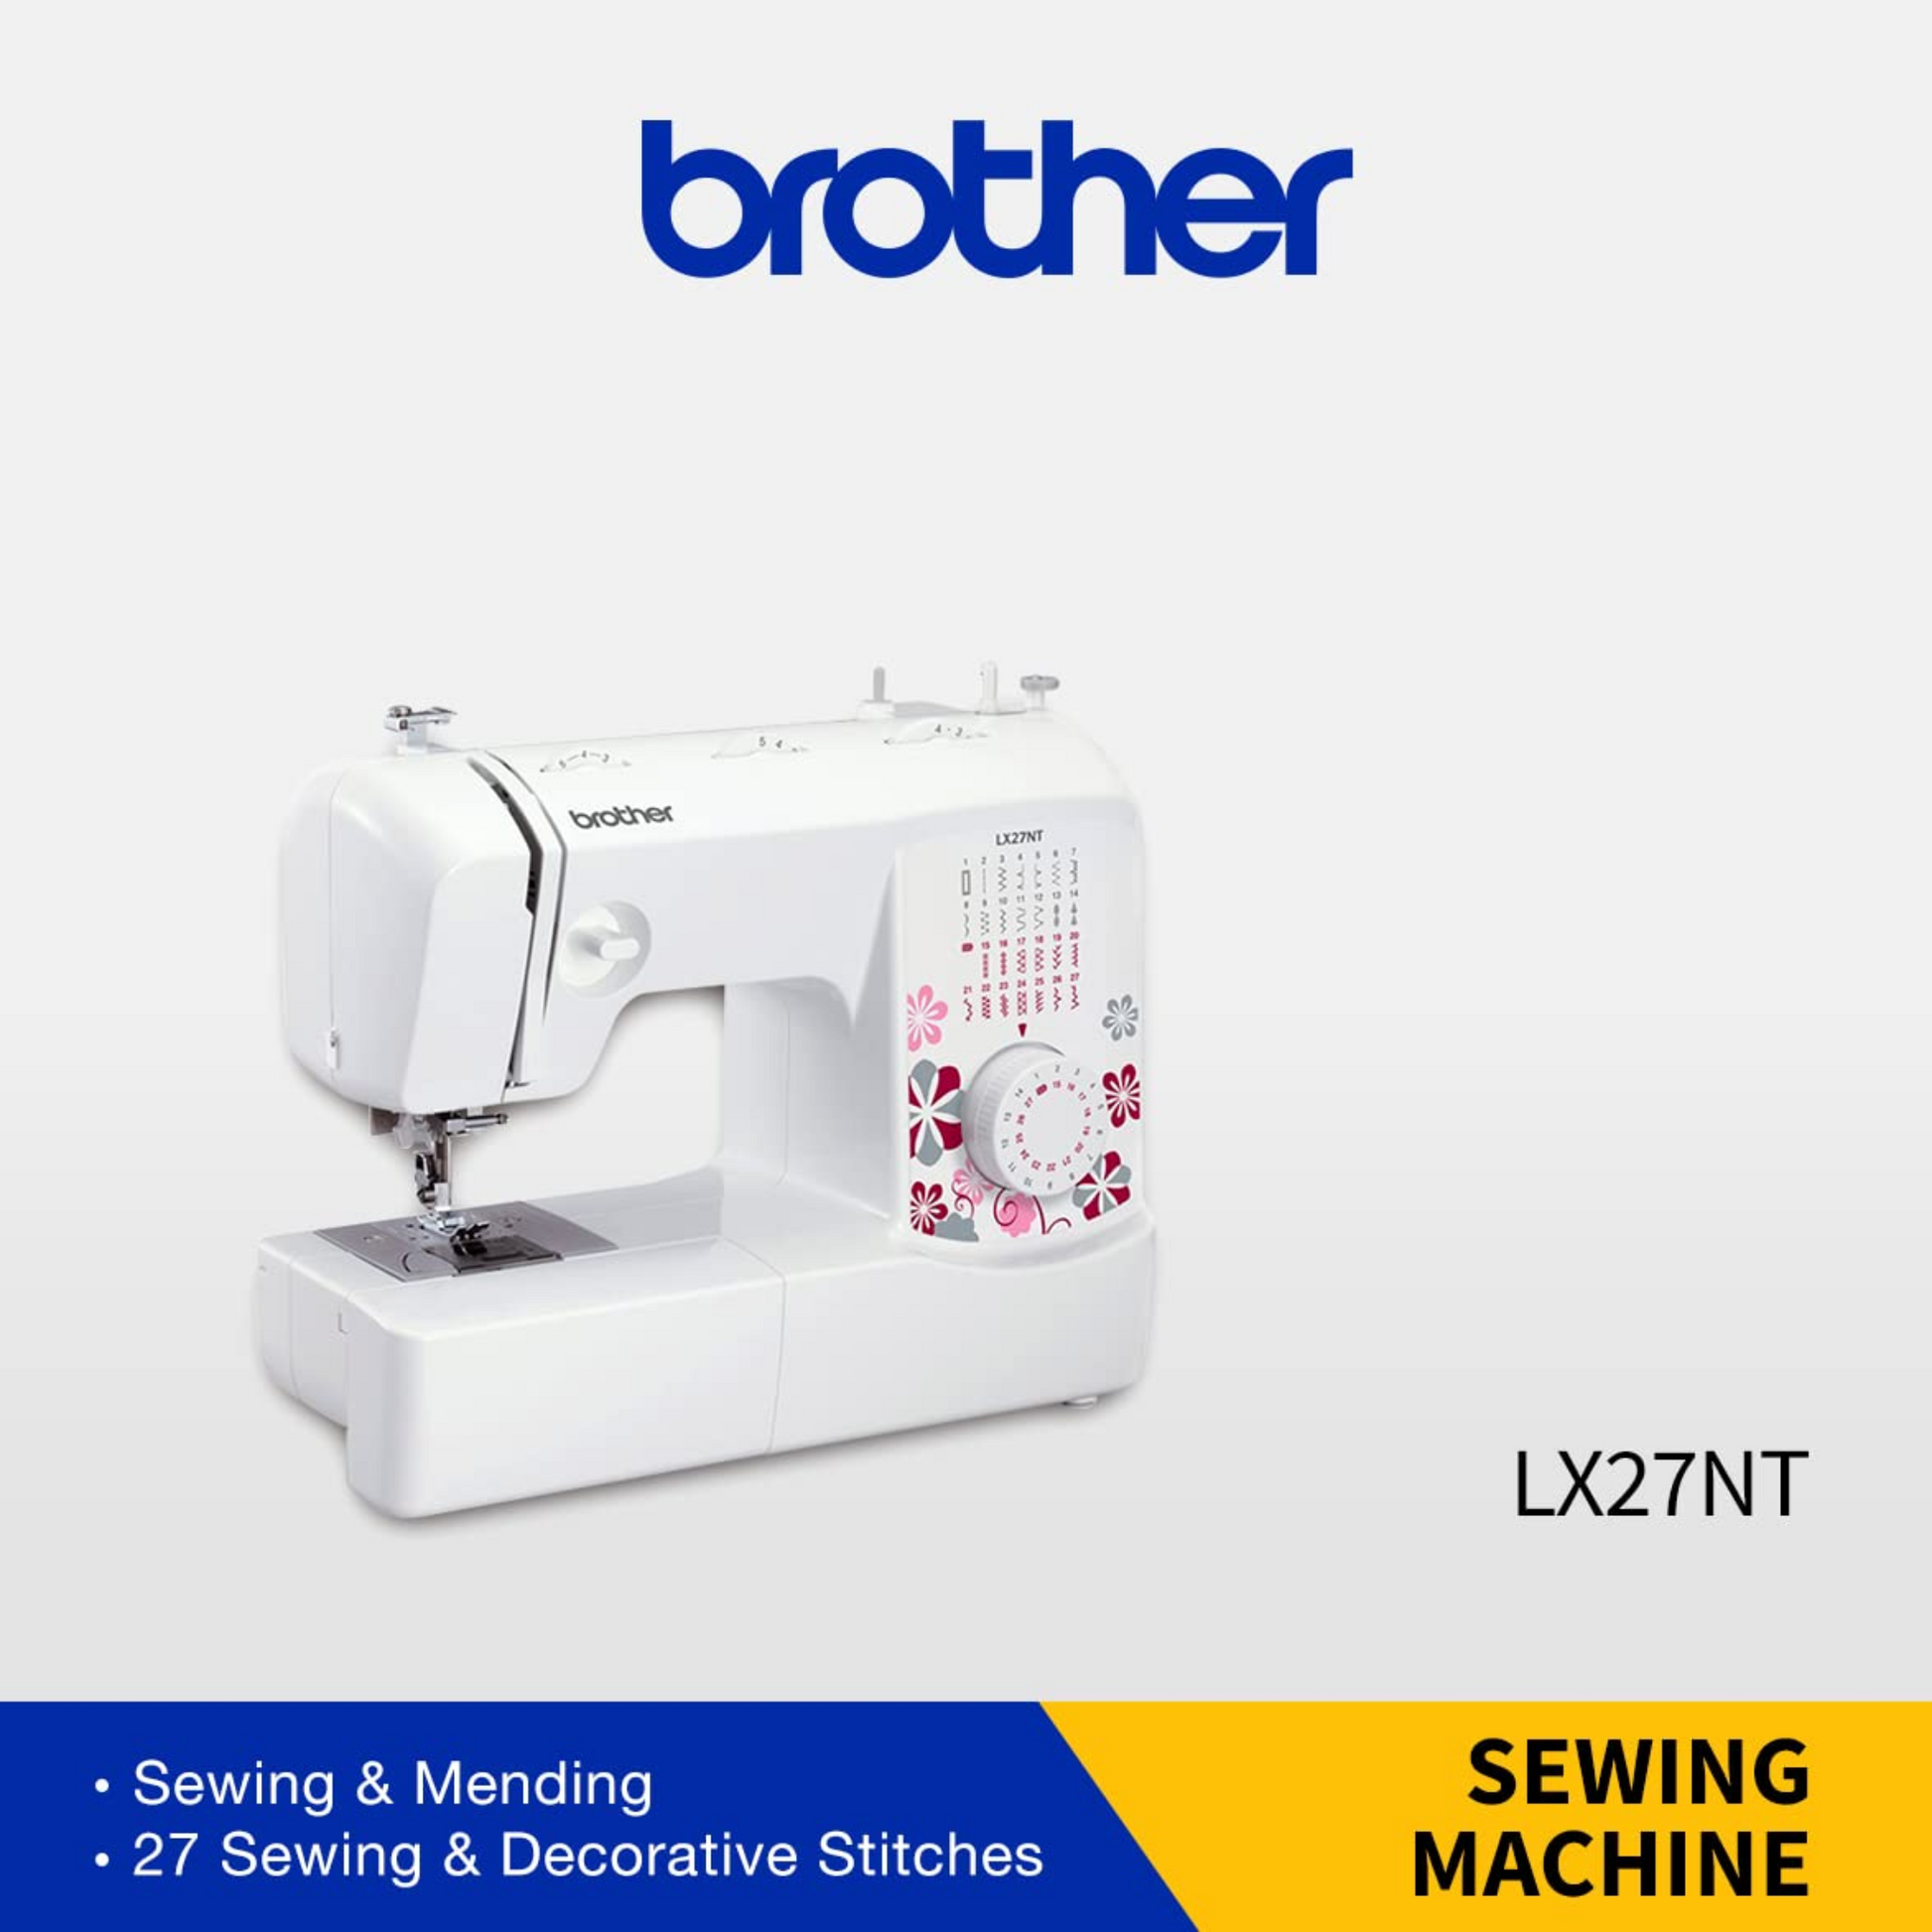 Brother LX27NT electric - Sewing machine - White - Side view